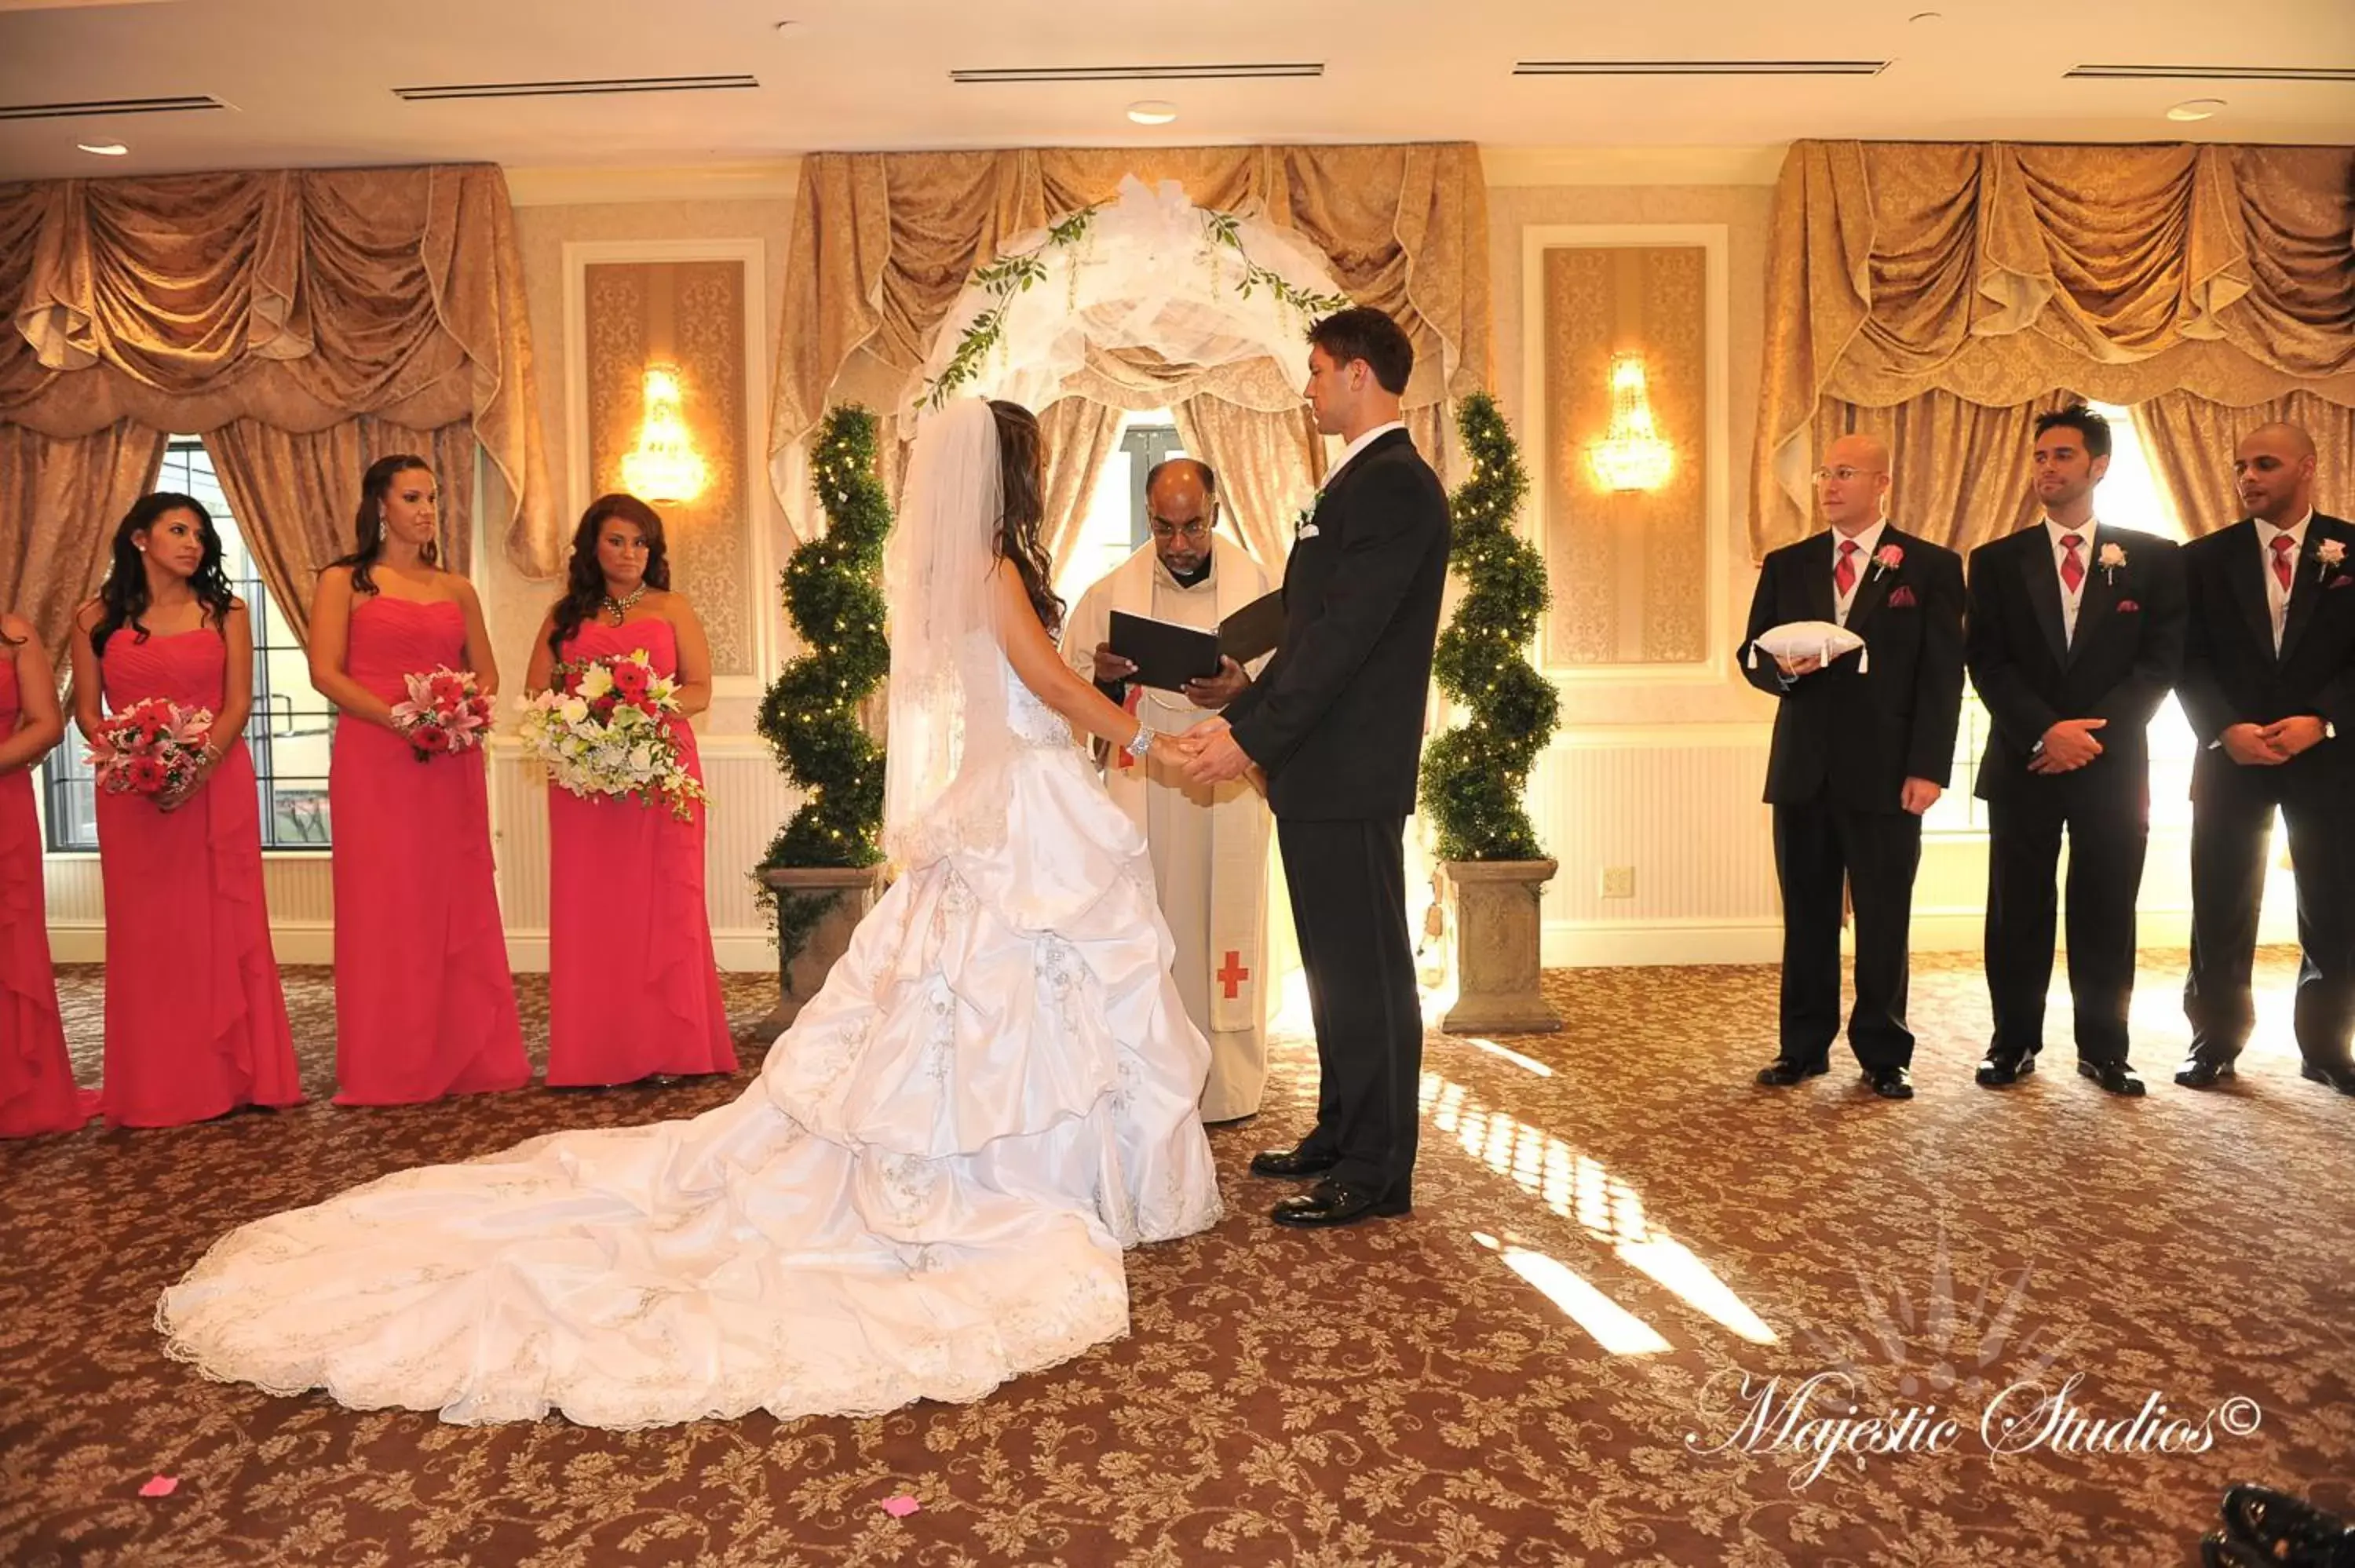 Banquet/Function facilities in The Poughkeepsie Grand Hotel